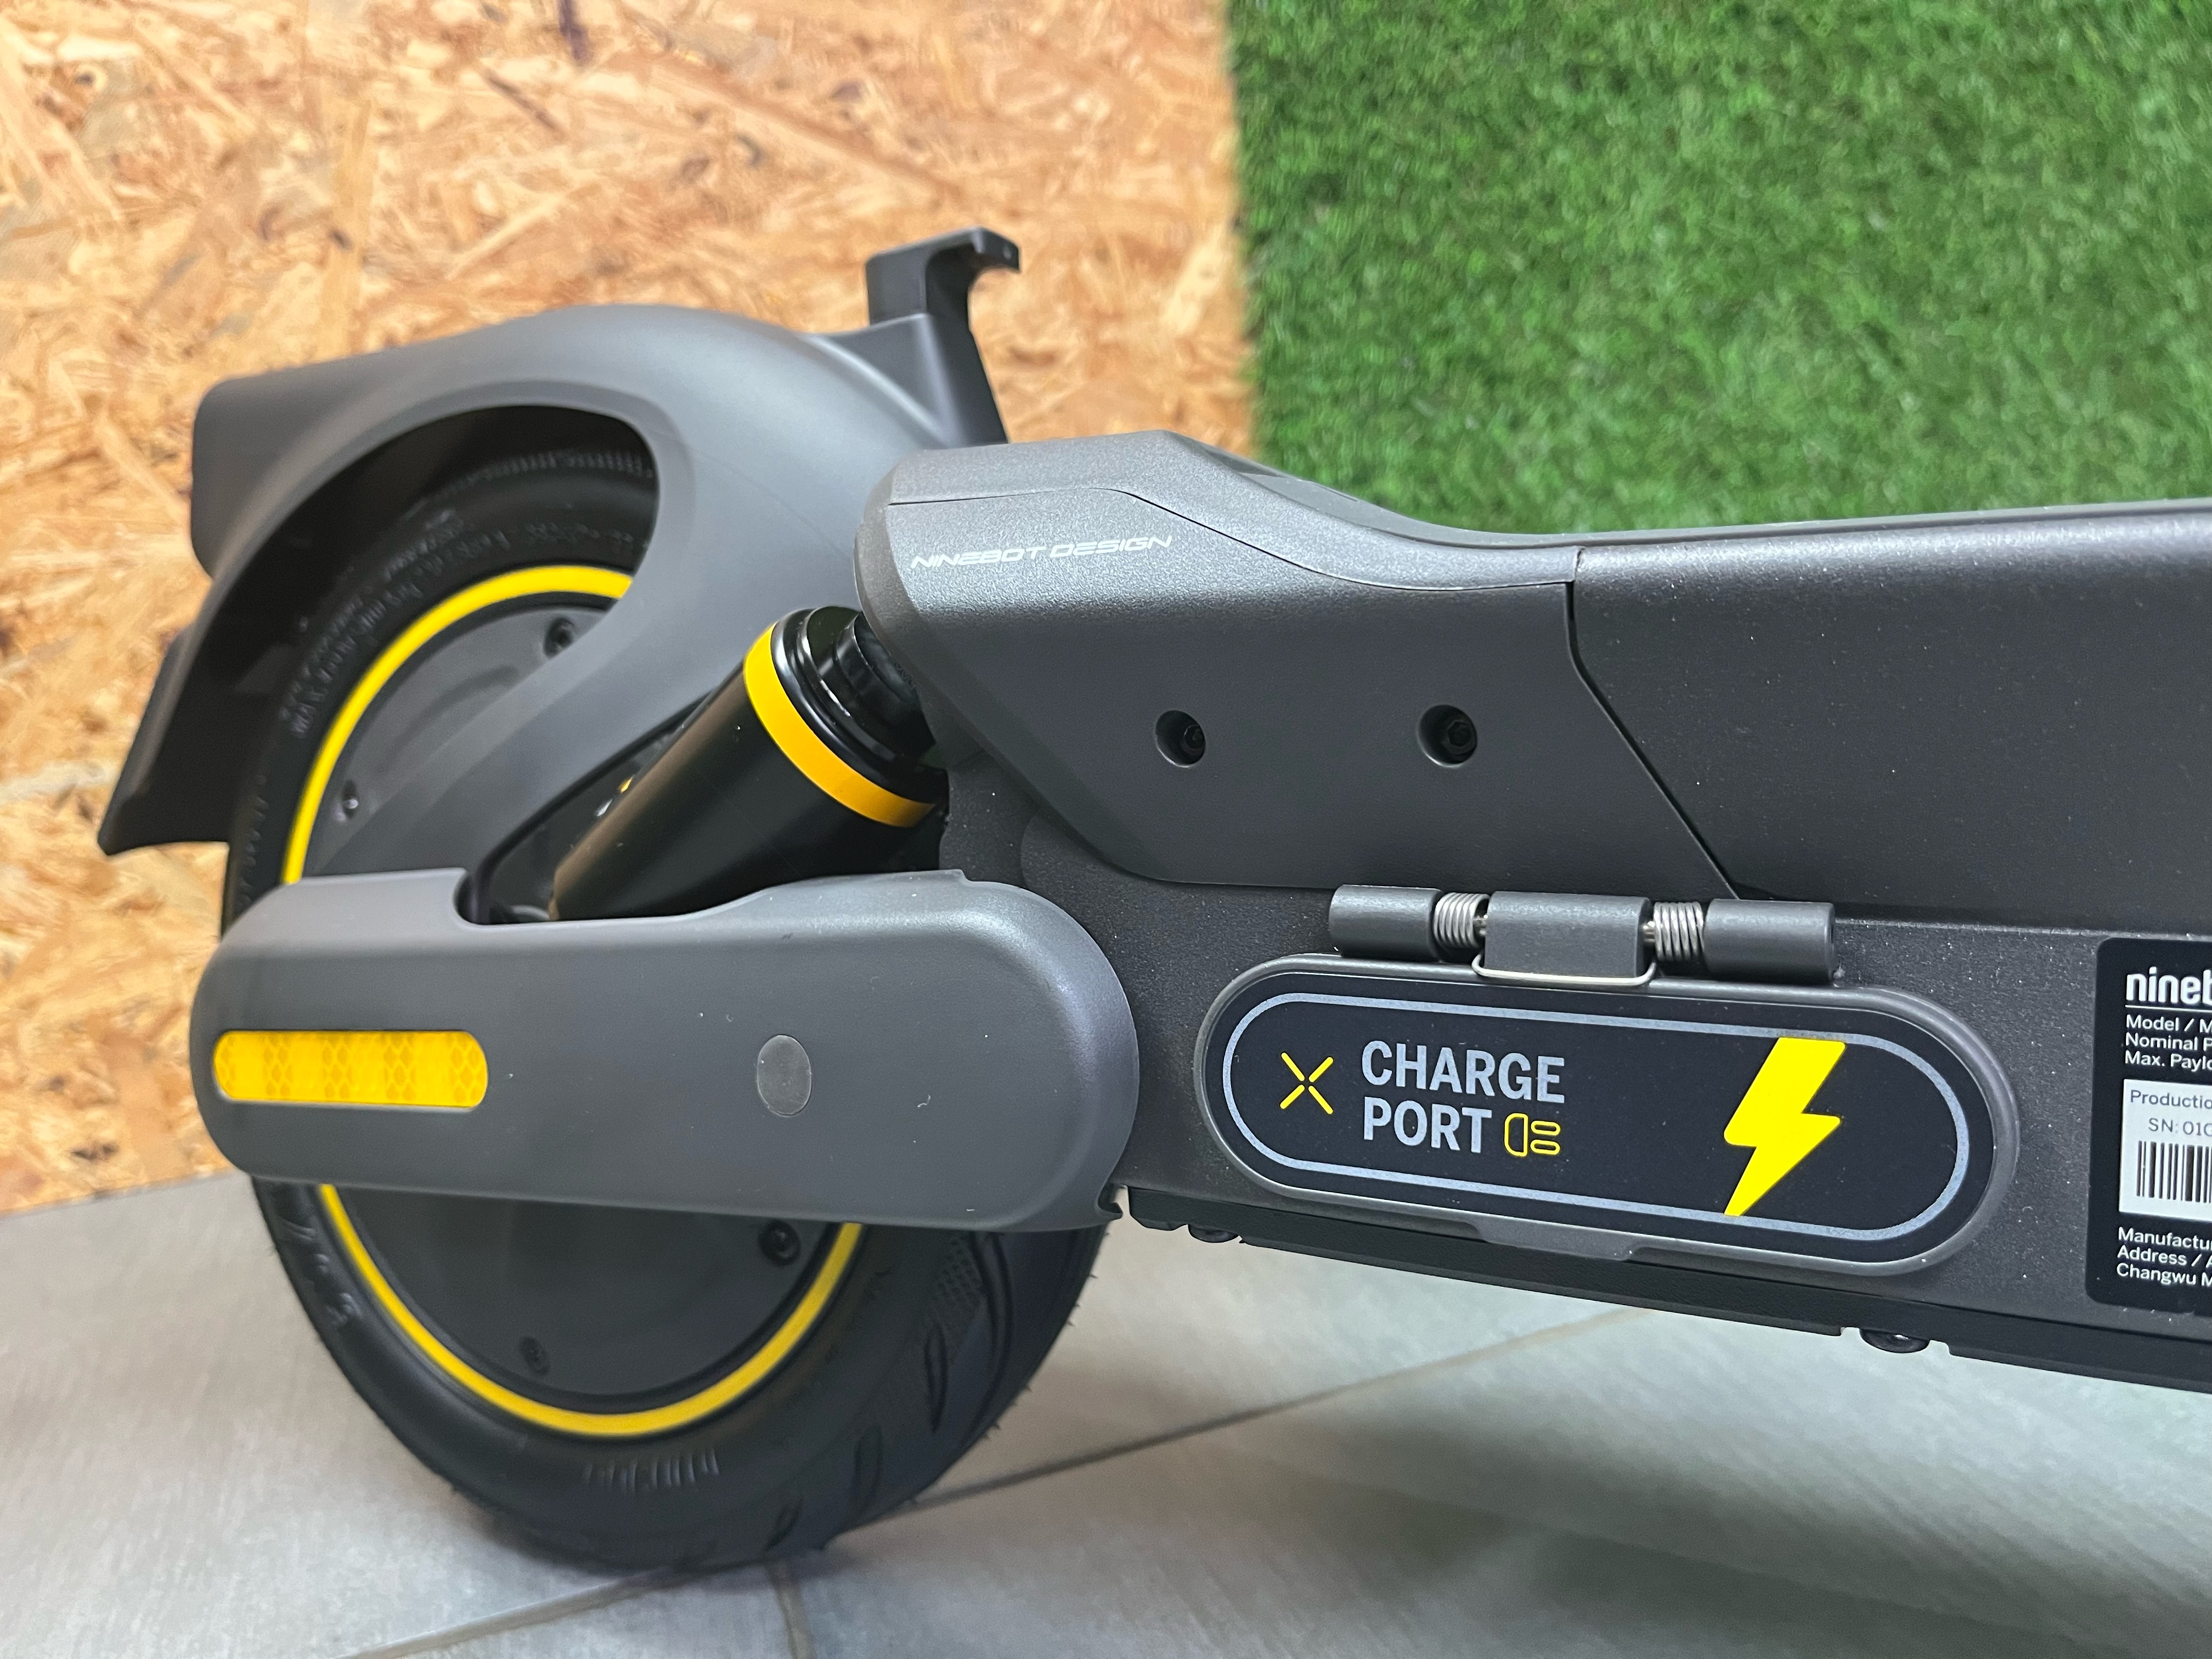 Ninebot Max G2 electric scooter (Official Benelux model) - My Mobelity